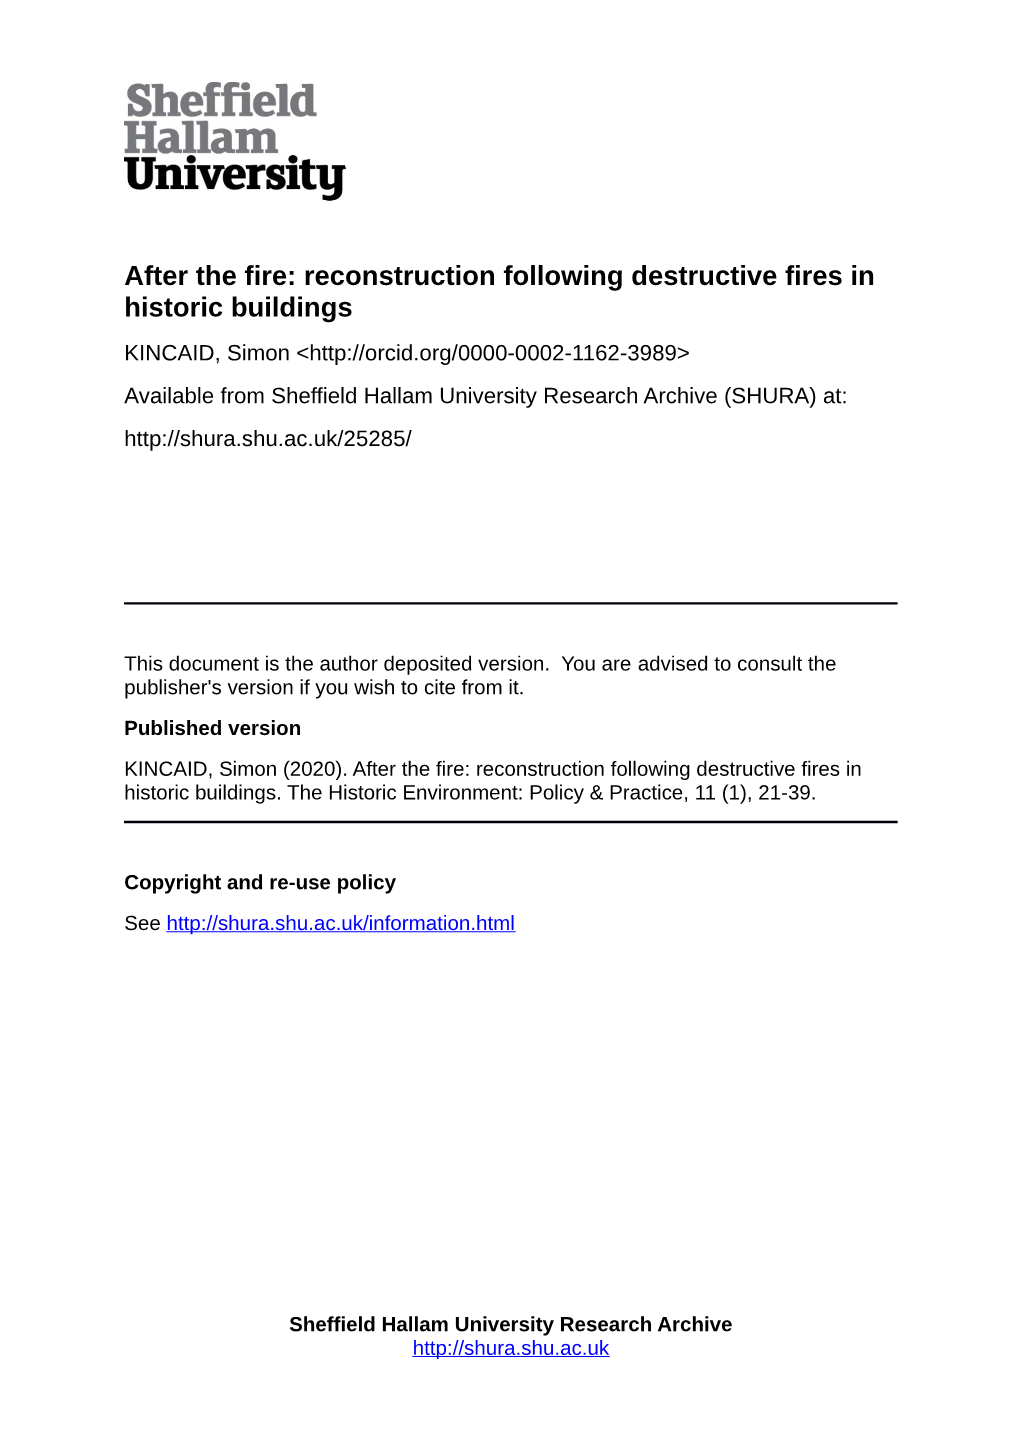 After the Fire: Reconstruction Following Destructive Fires in Historic Buildings